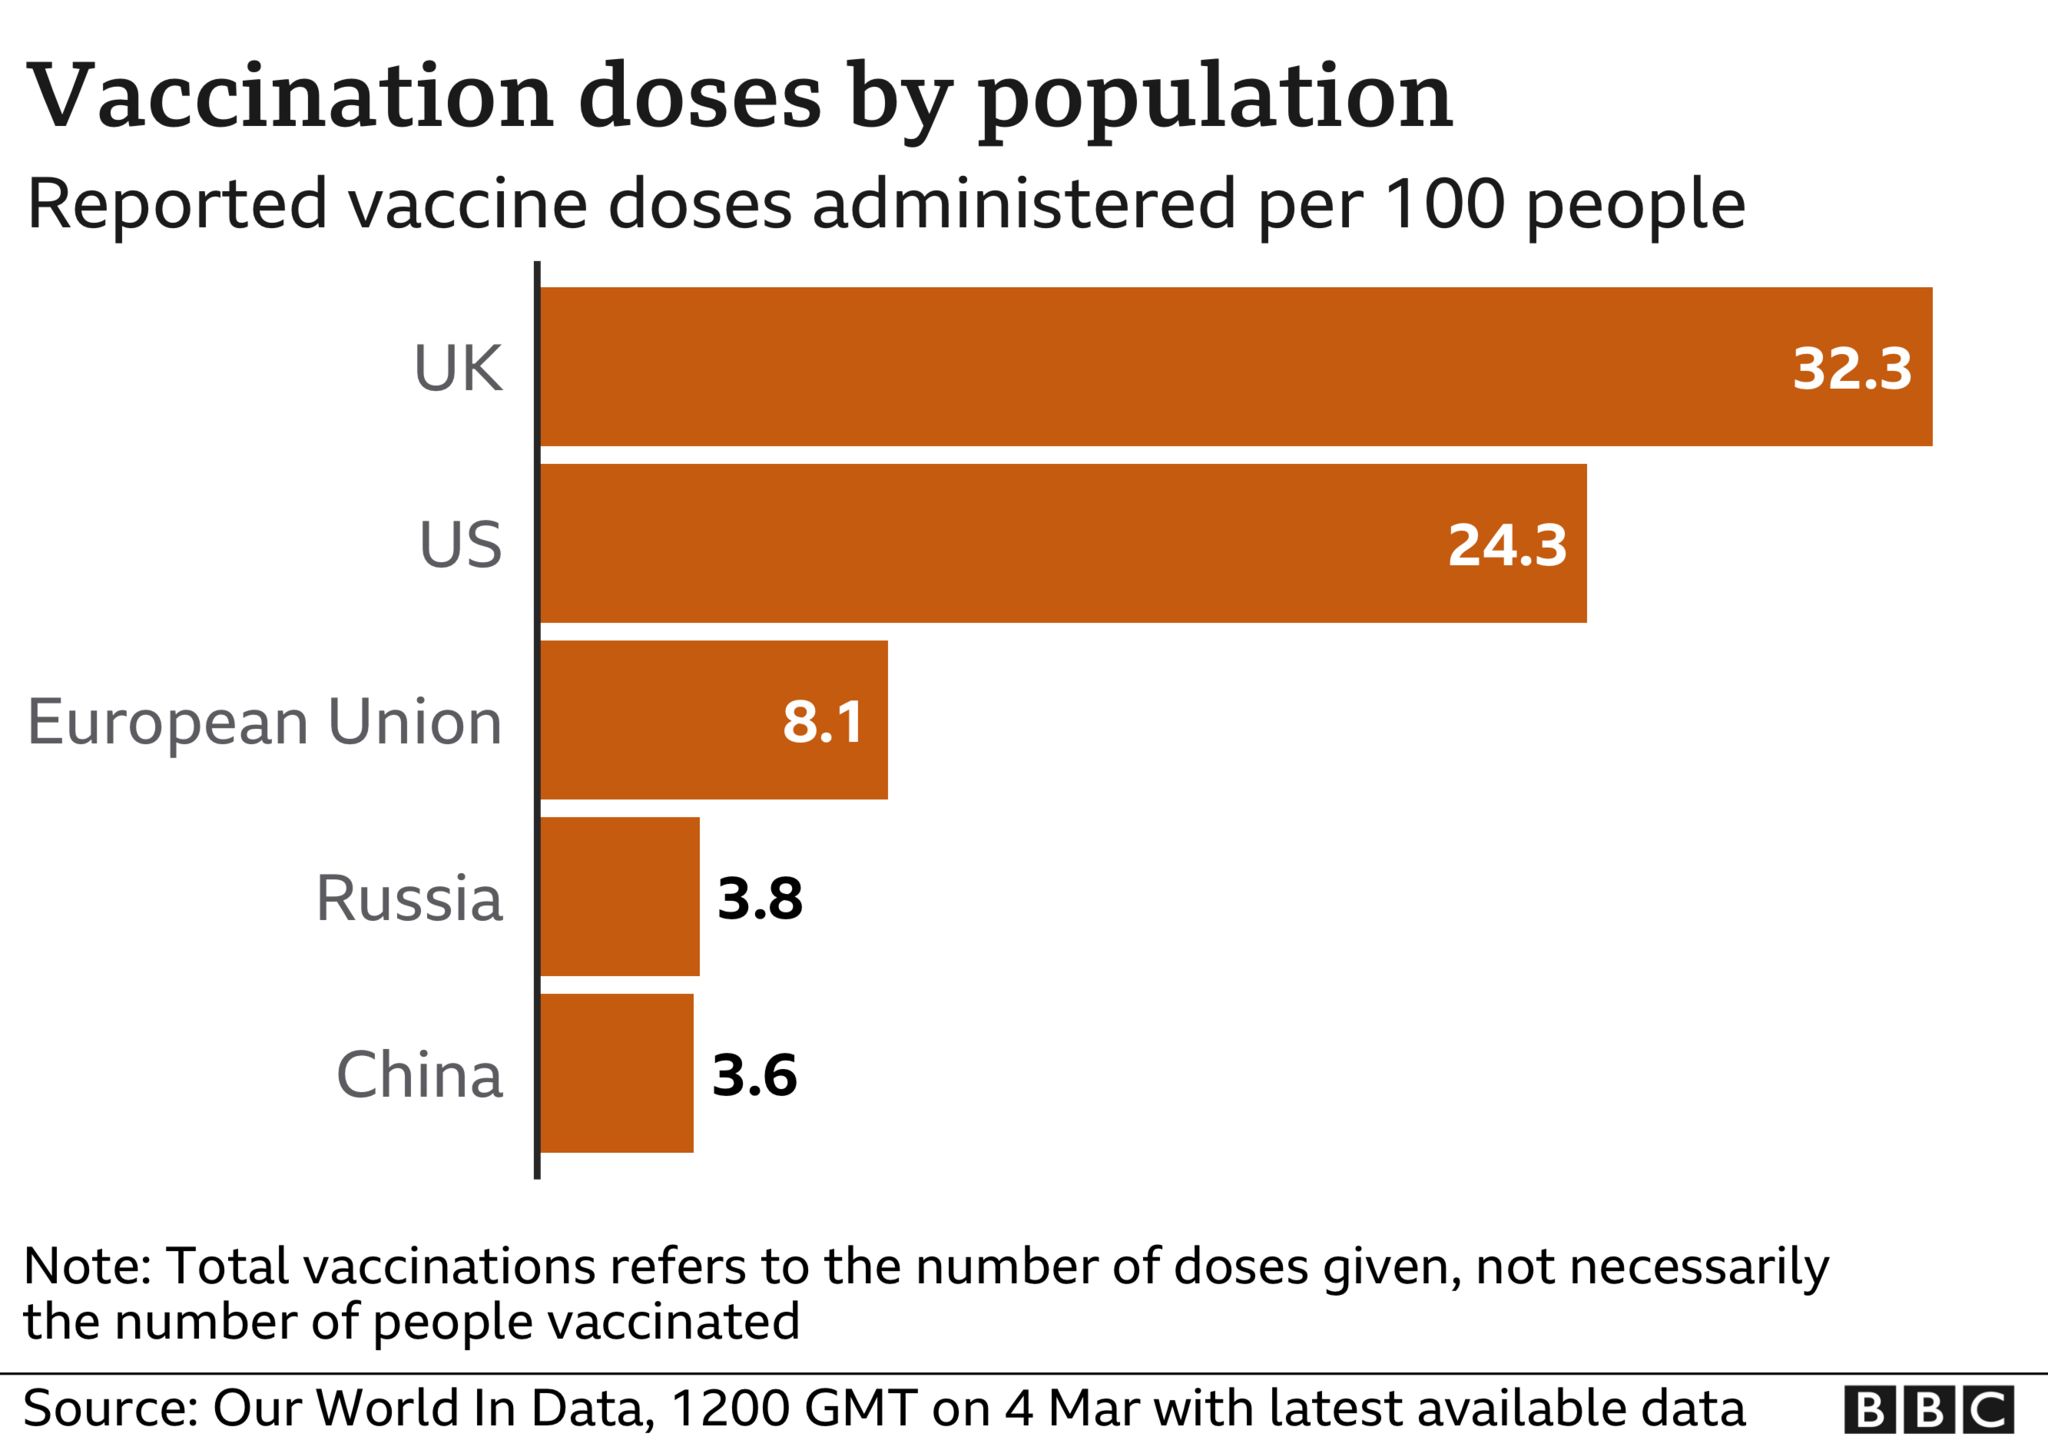 Chart showing the number of doses administered in the UK, US, EU, China and Russia